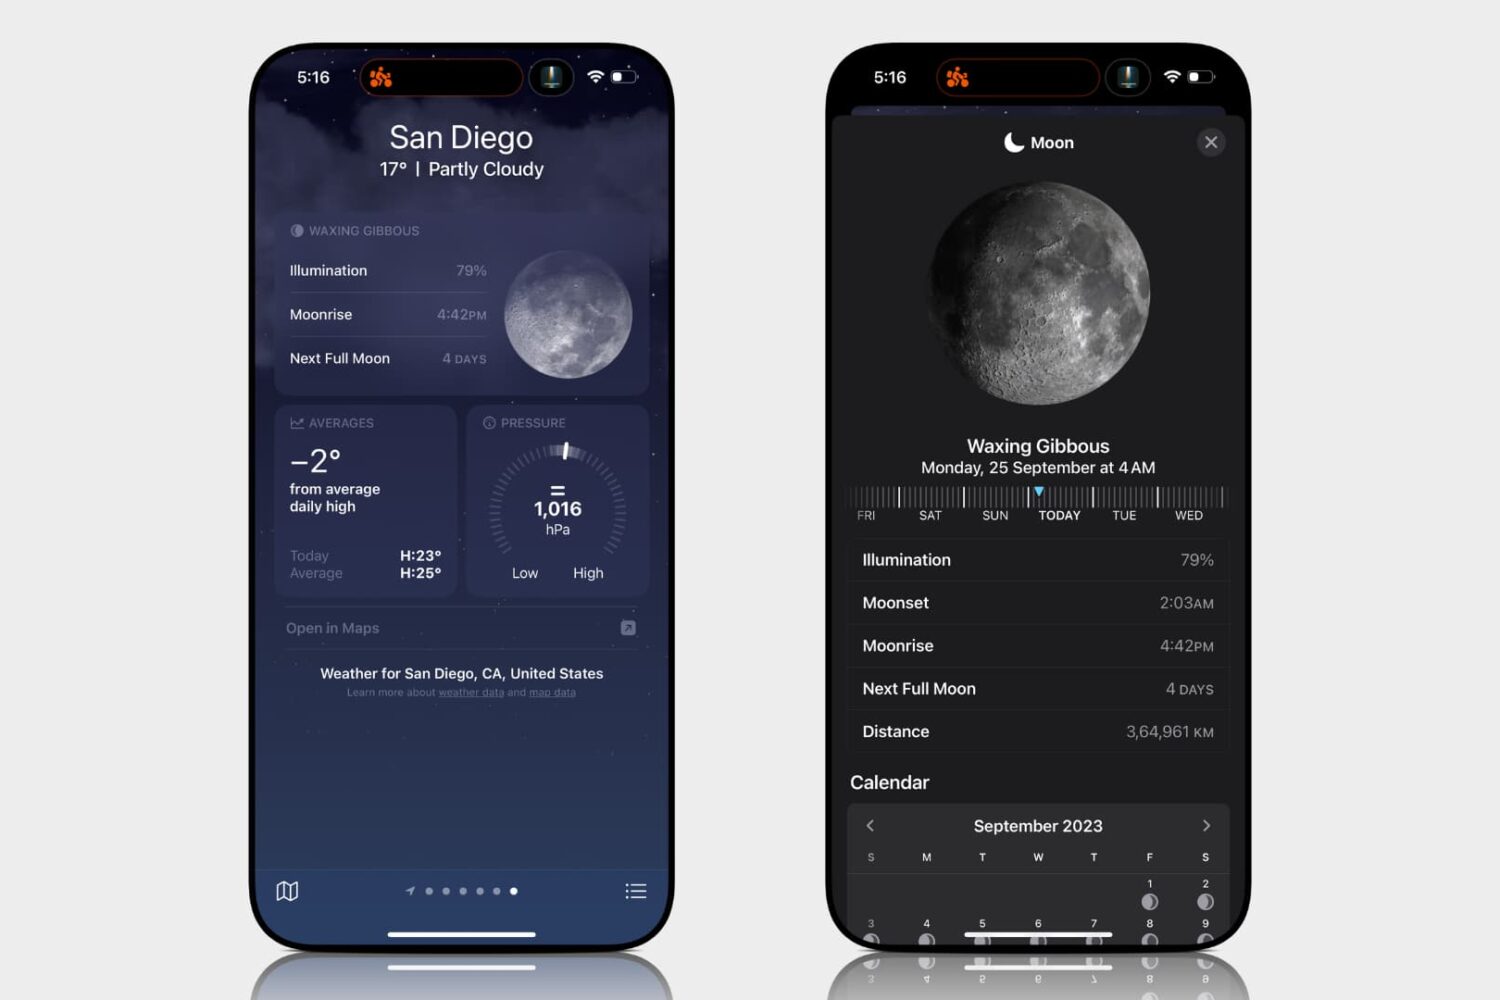 Seeing Moon details in Weather app on iPhone